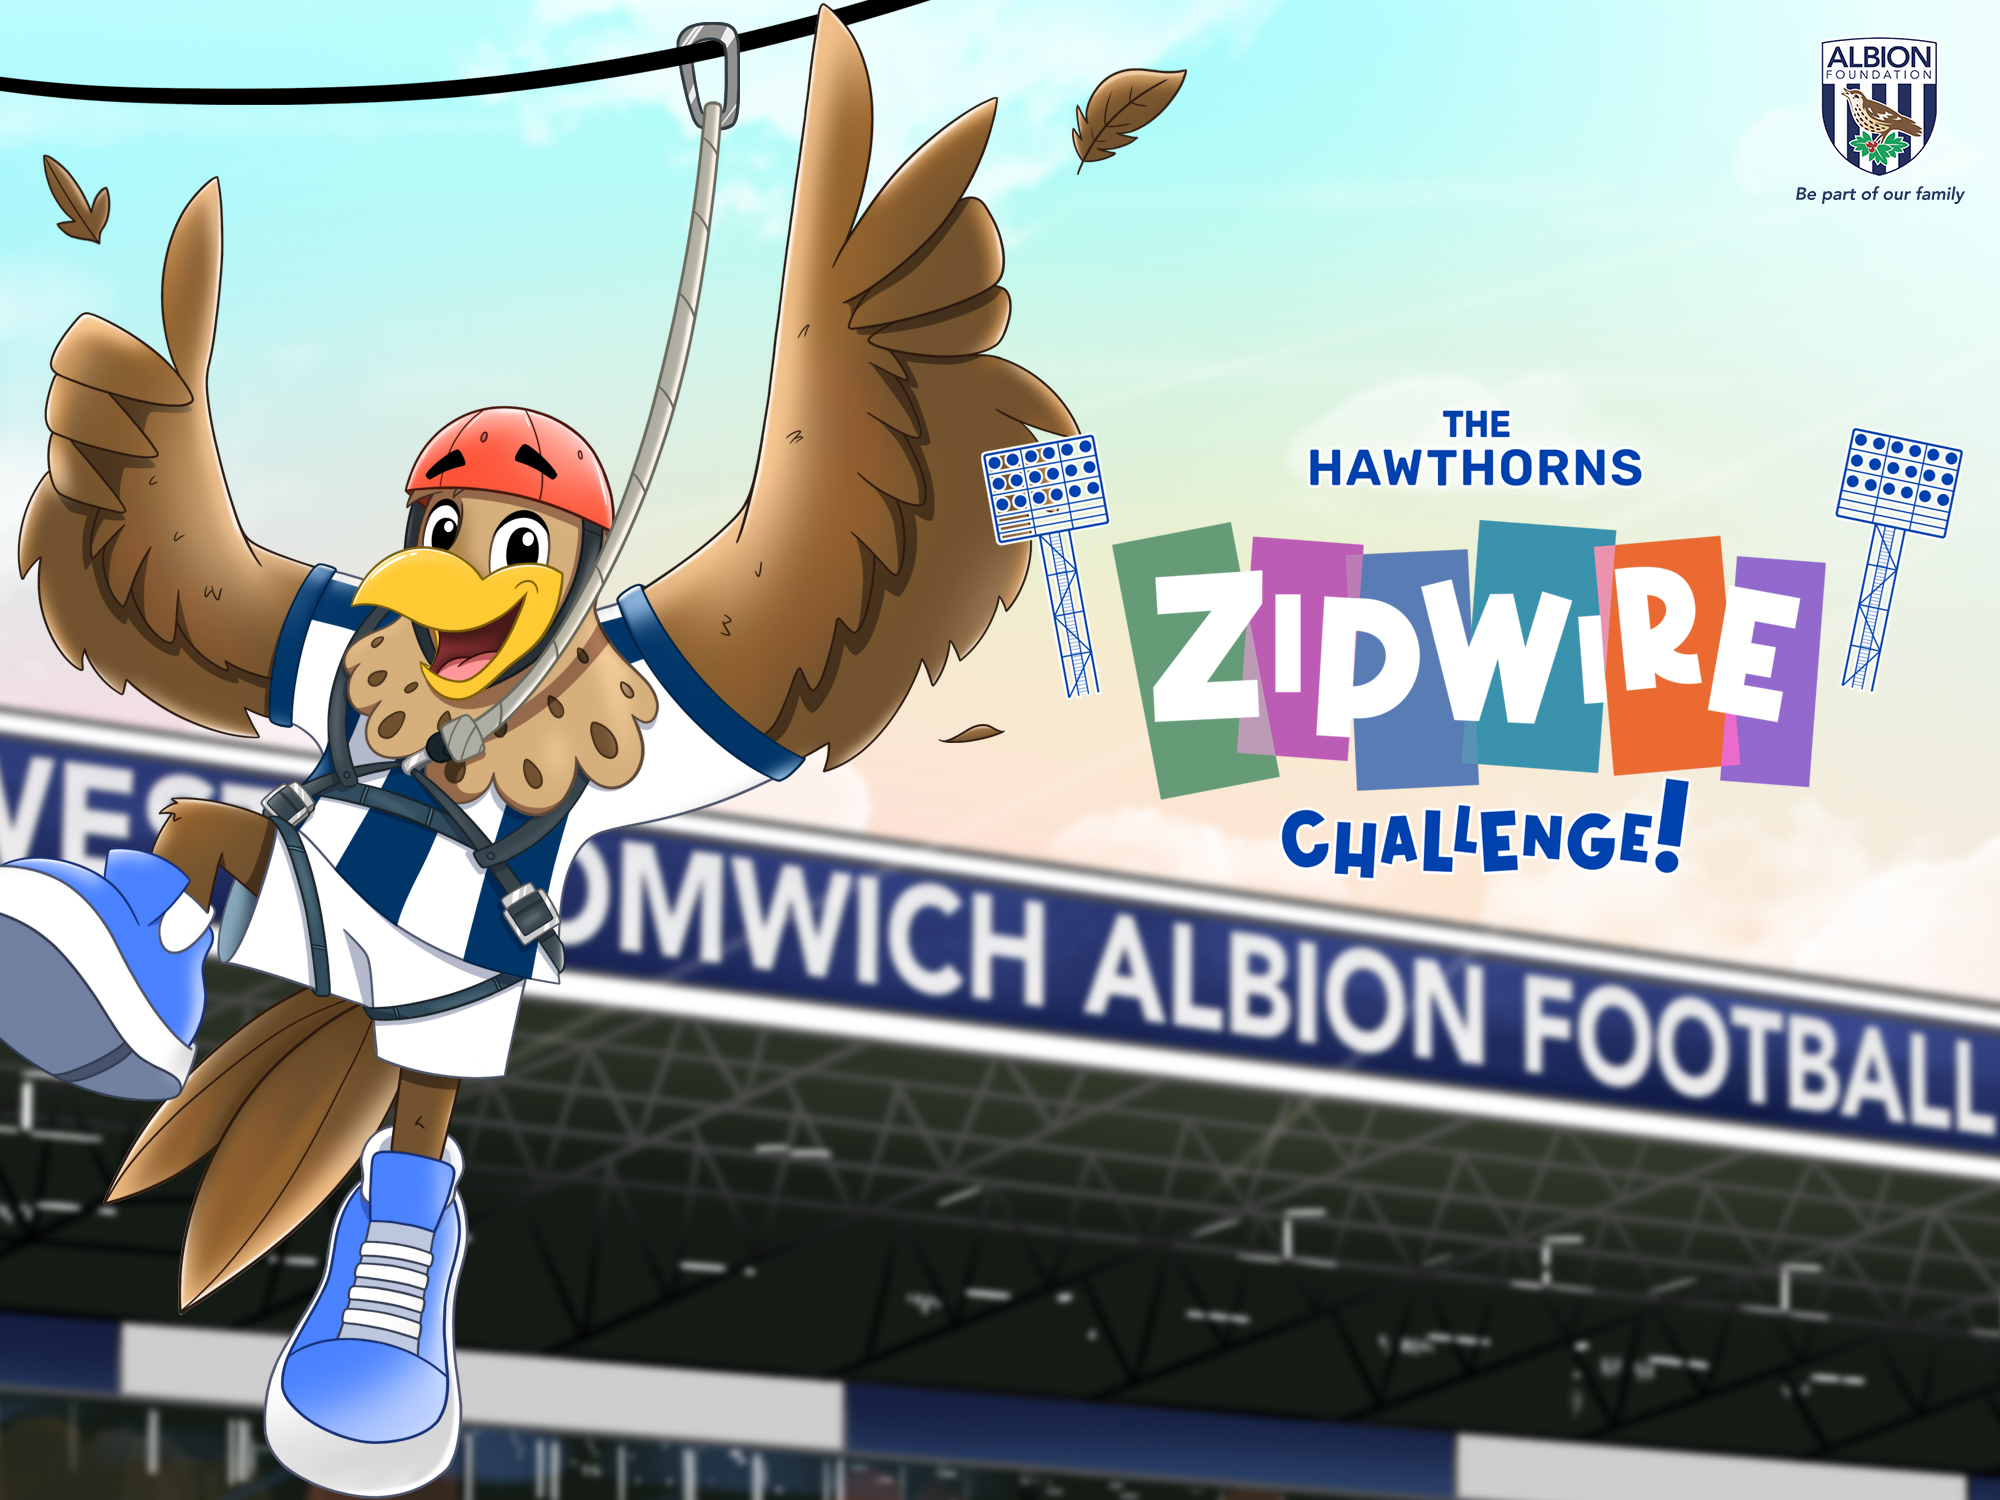 the Hawthorns Zip wire Challenge graphic by Liam Harris